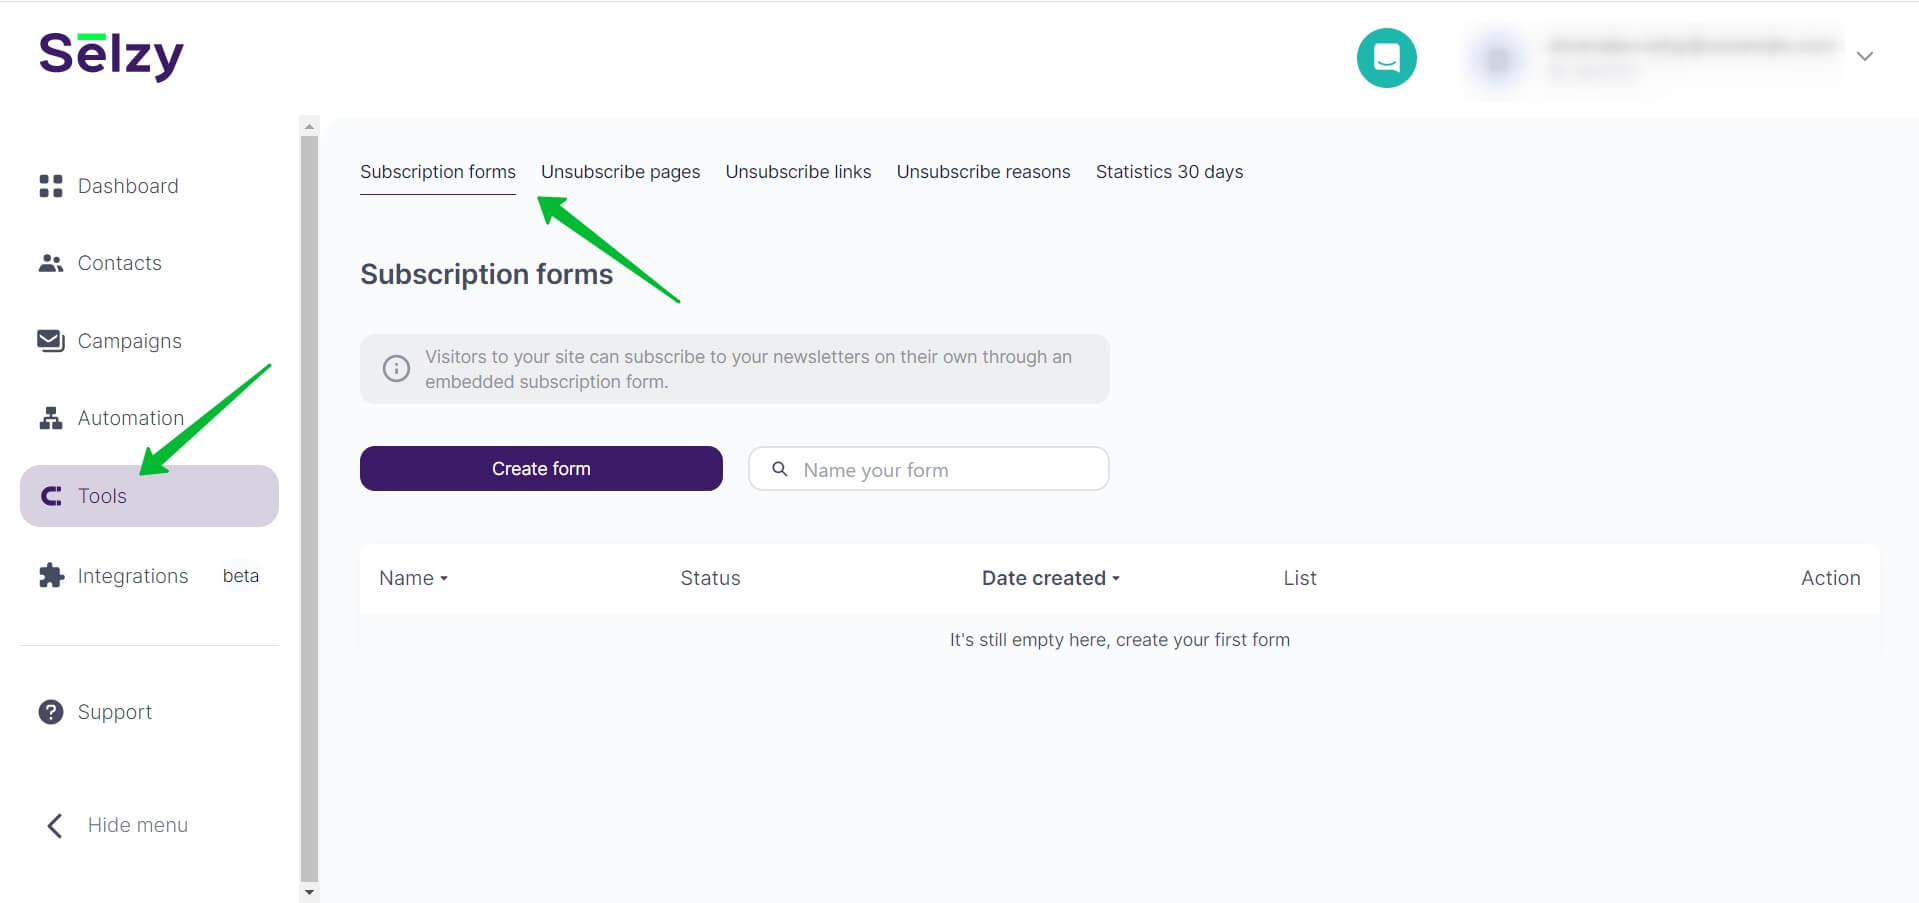 Subscription forms subsection